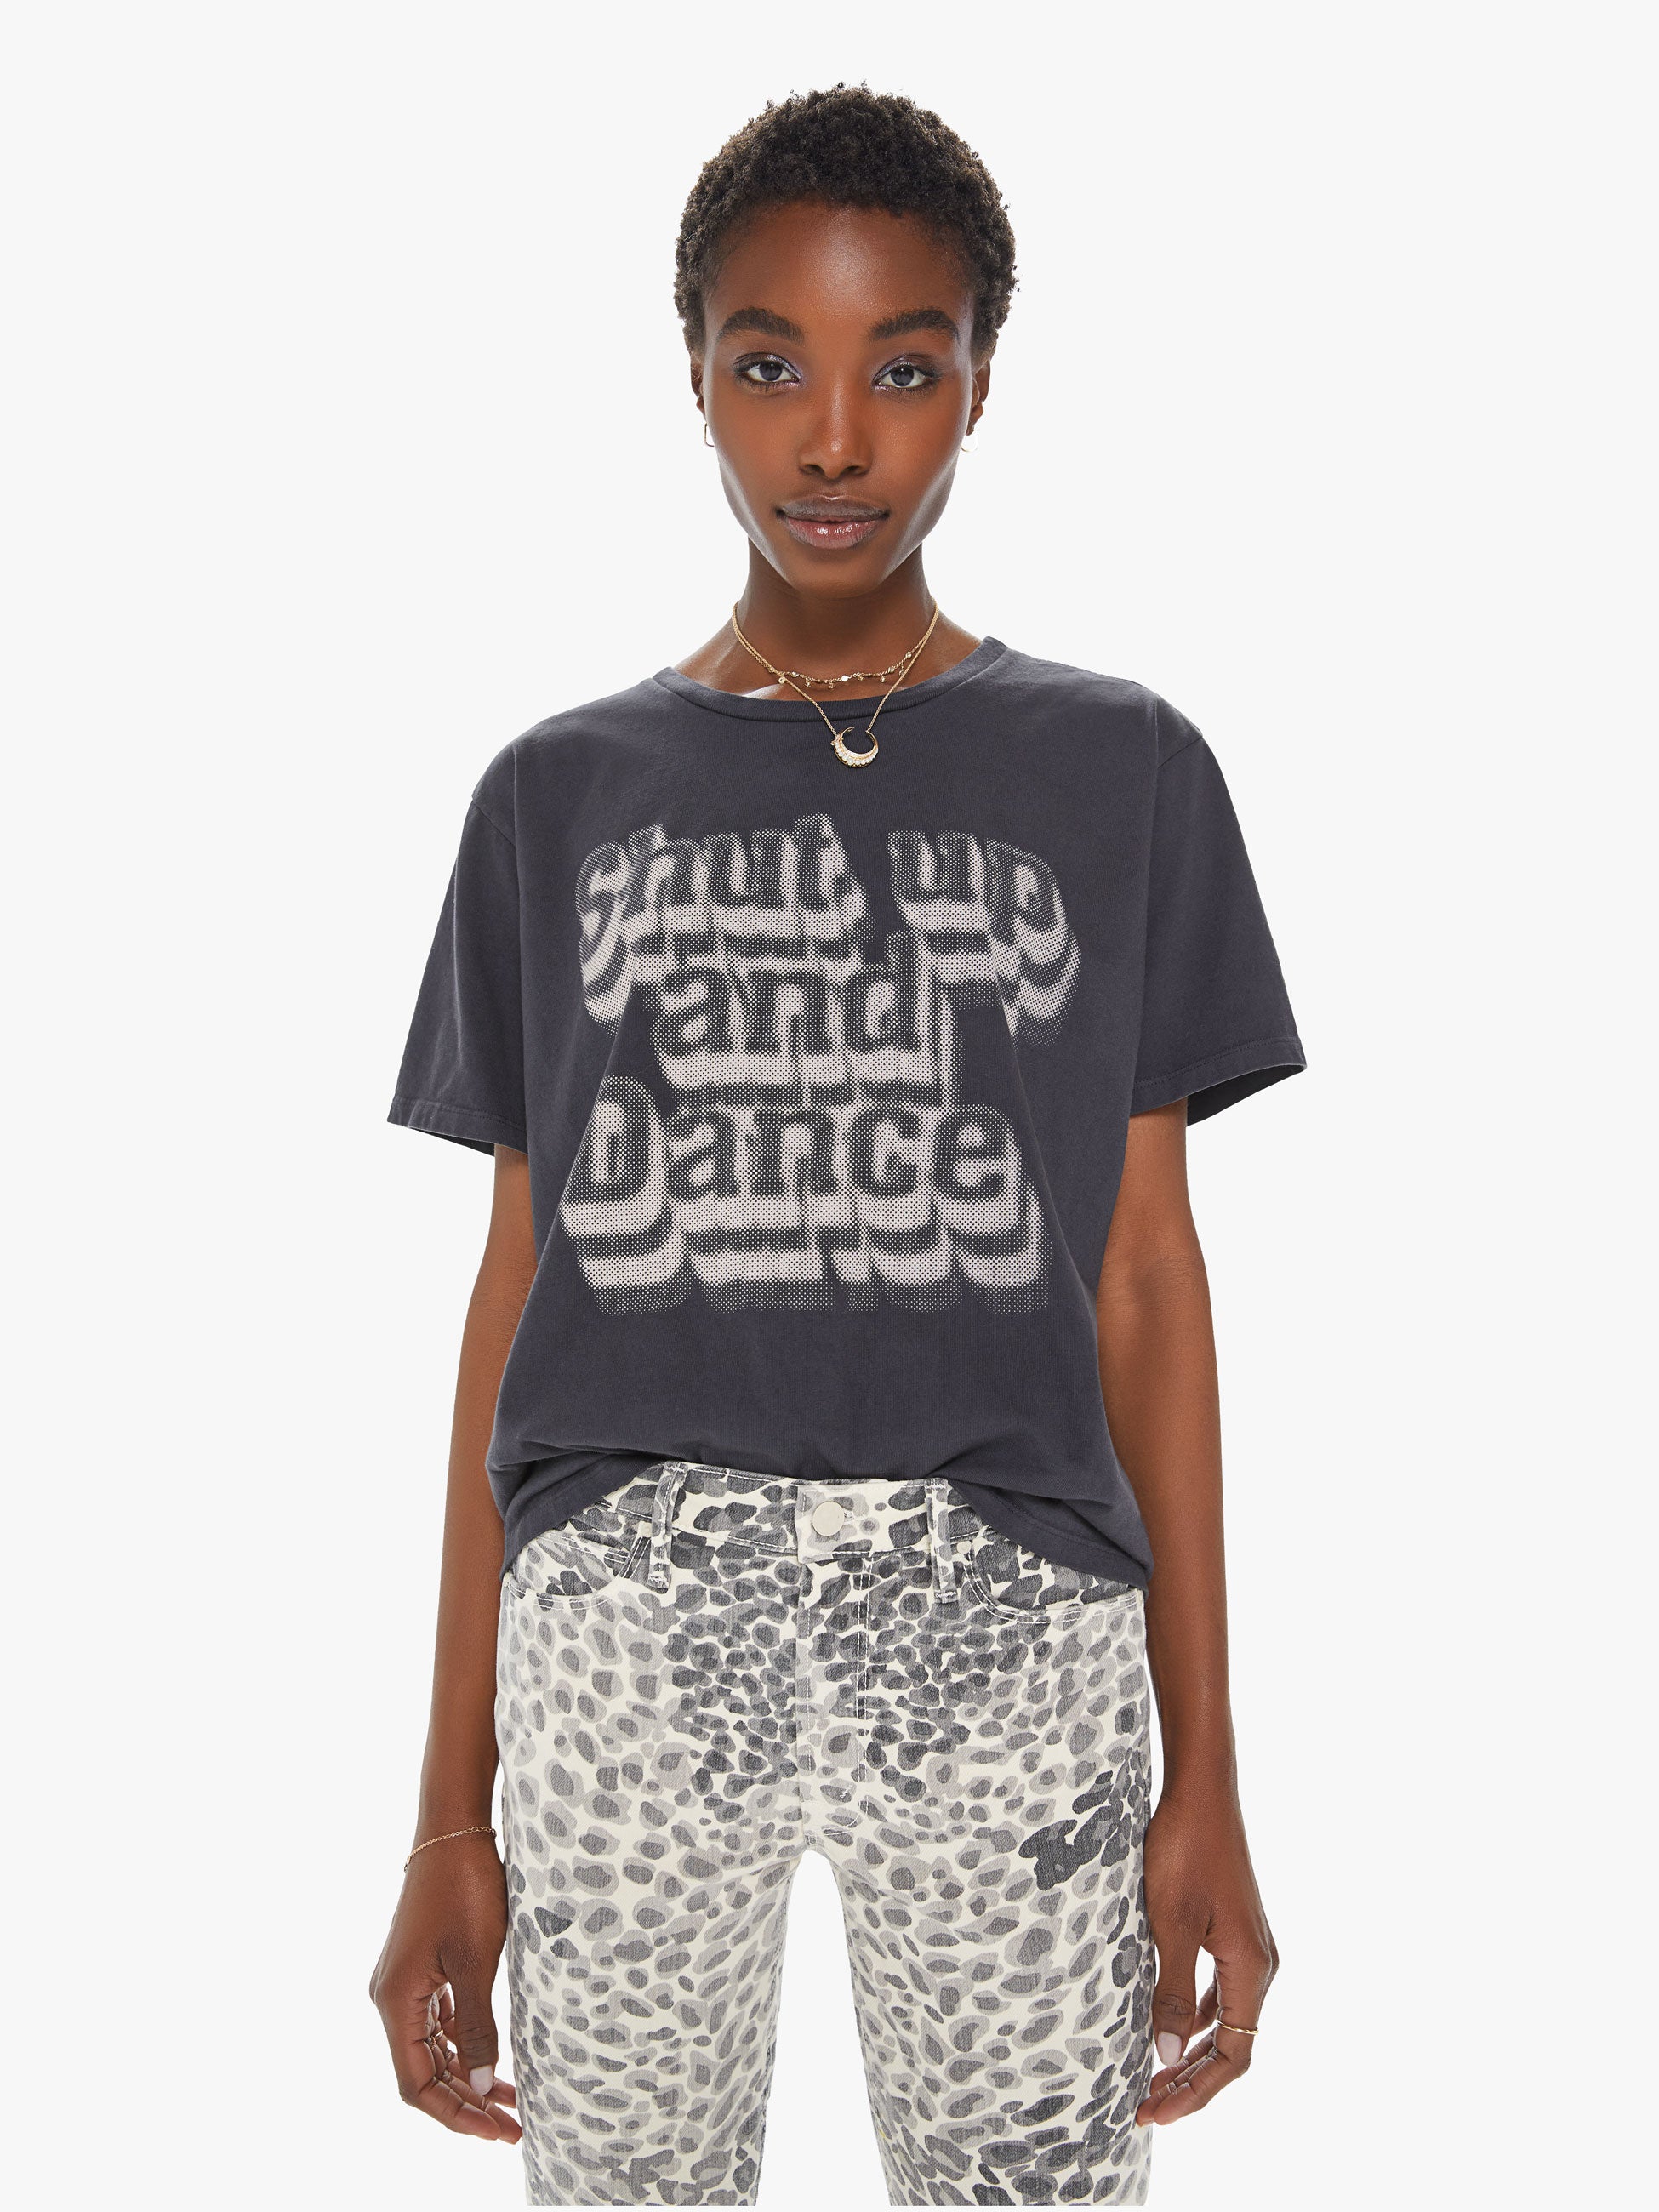 MOTHER THE ROWDY SHUT UP AND DANCE TEE SHIRT